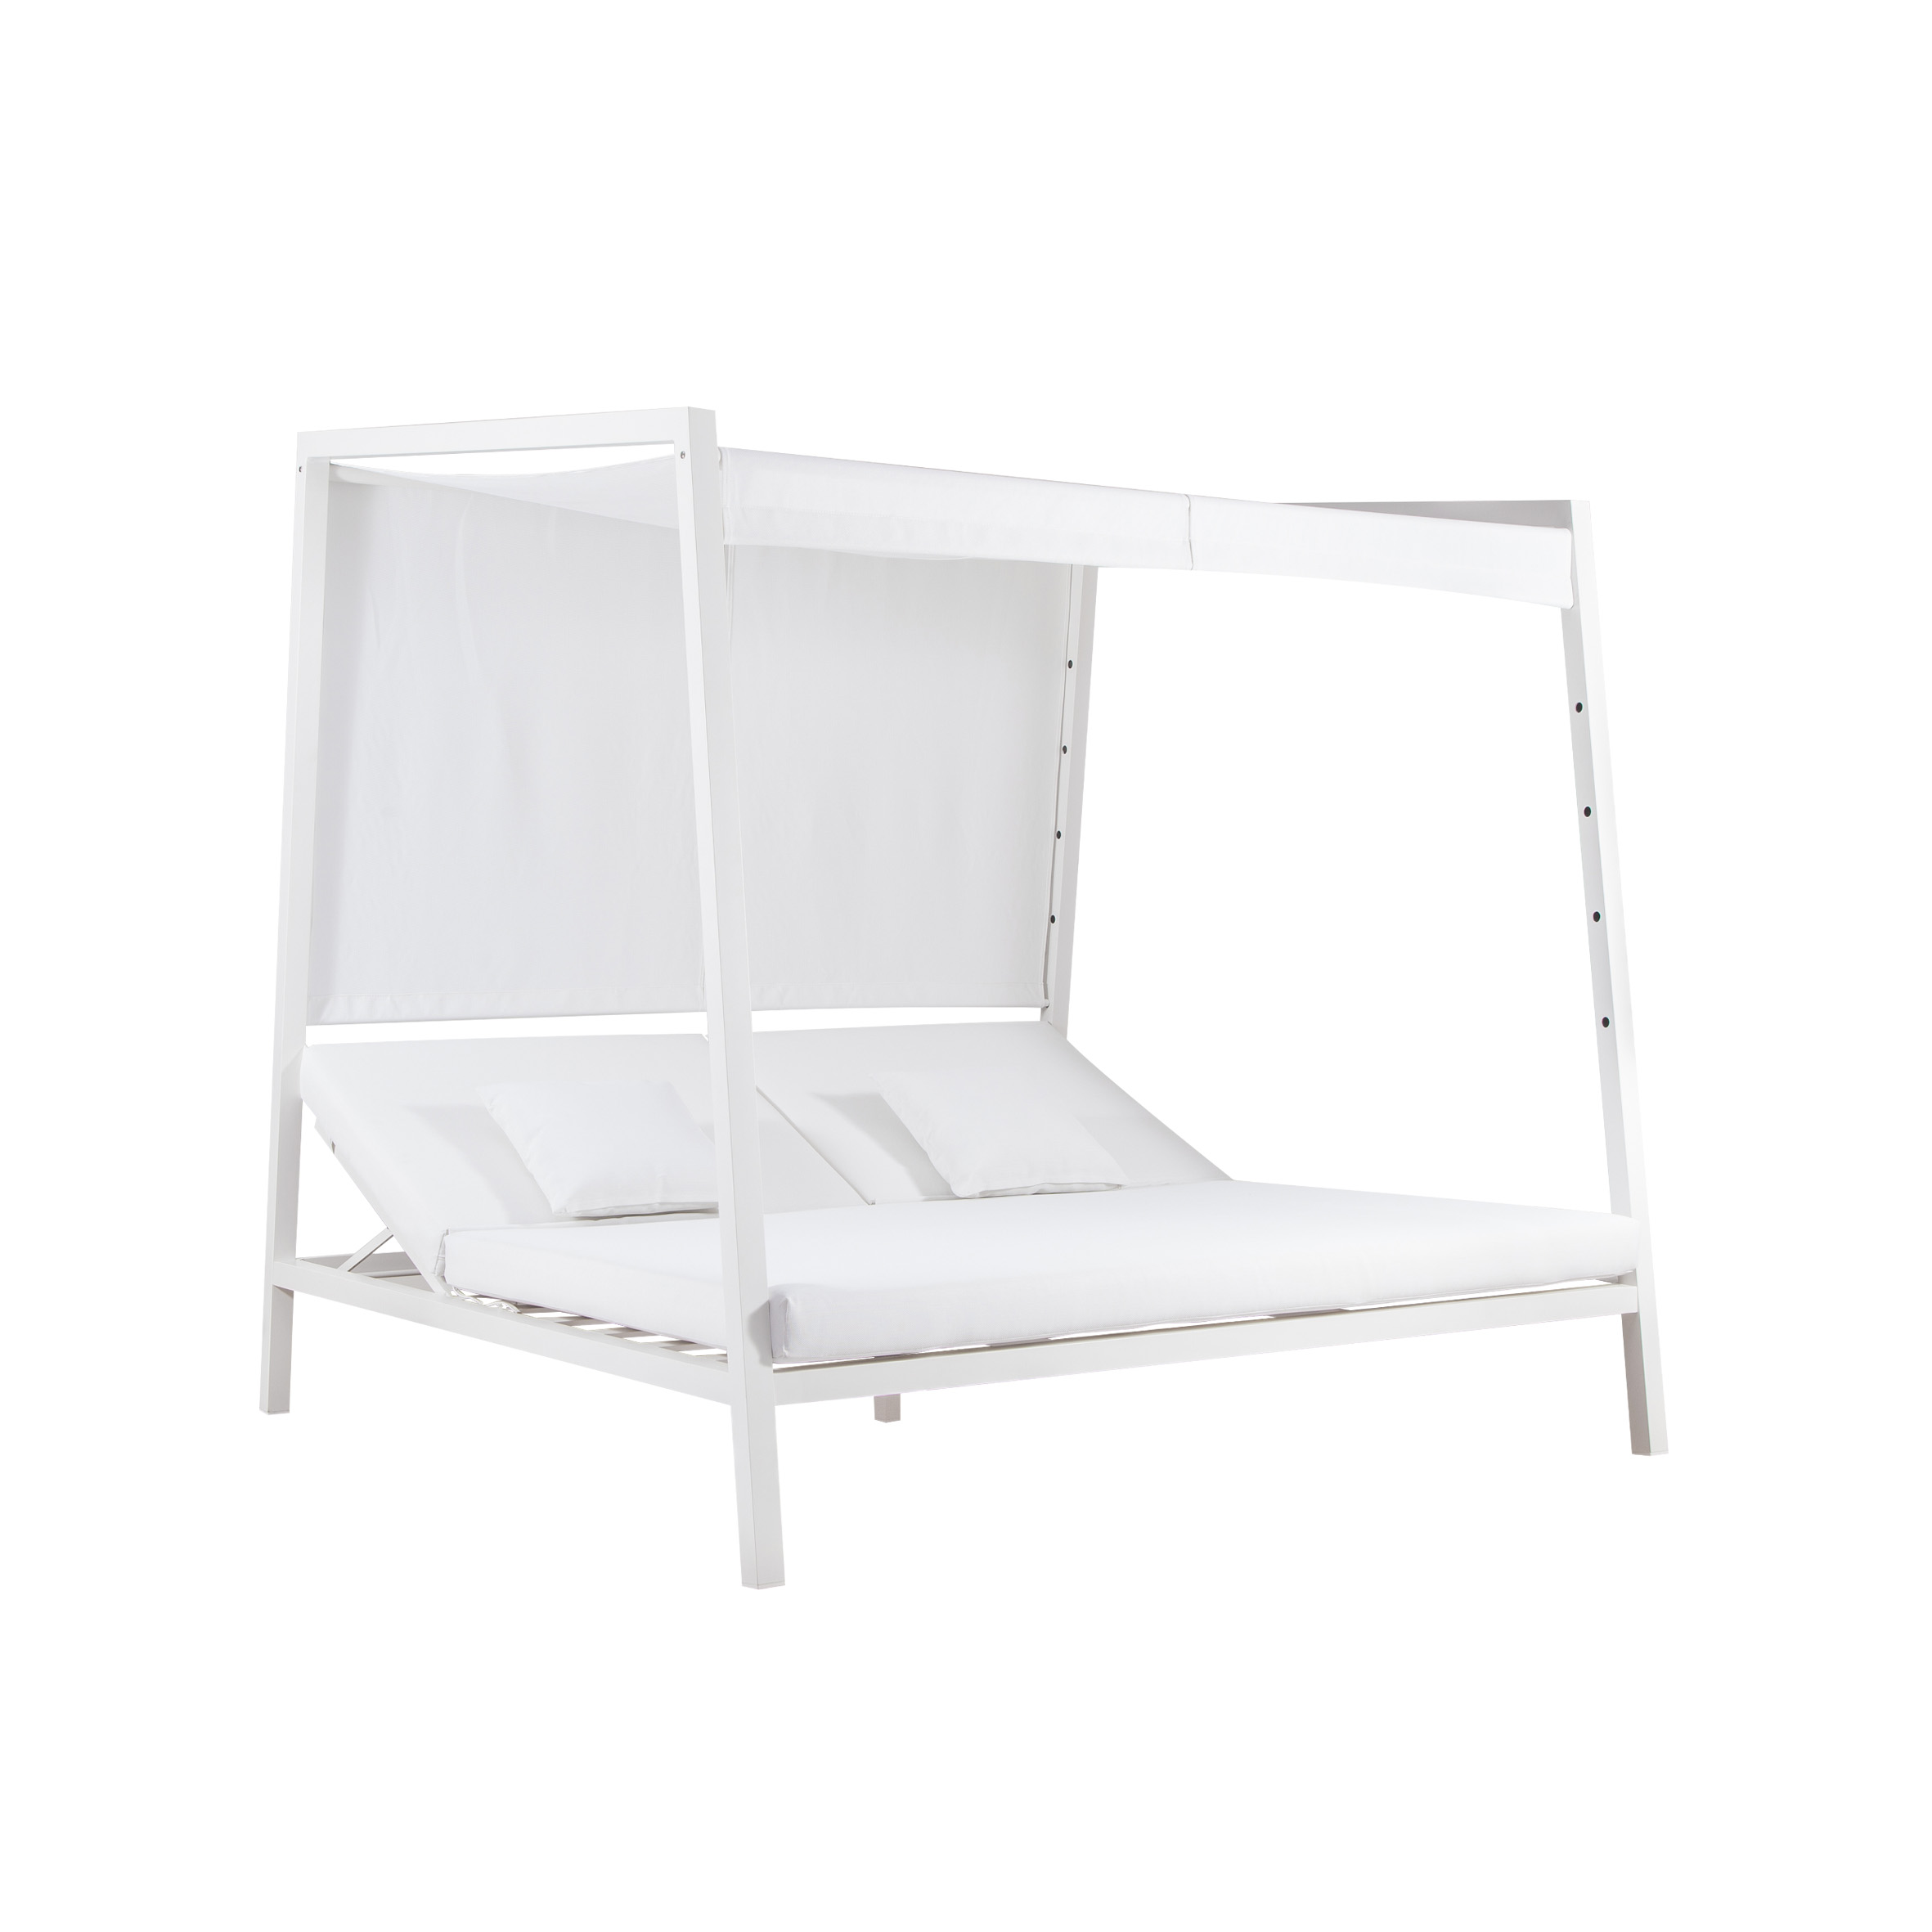 Snow white alu. daybed S4